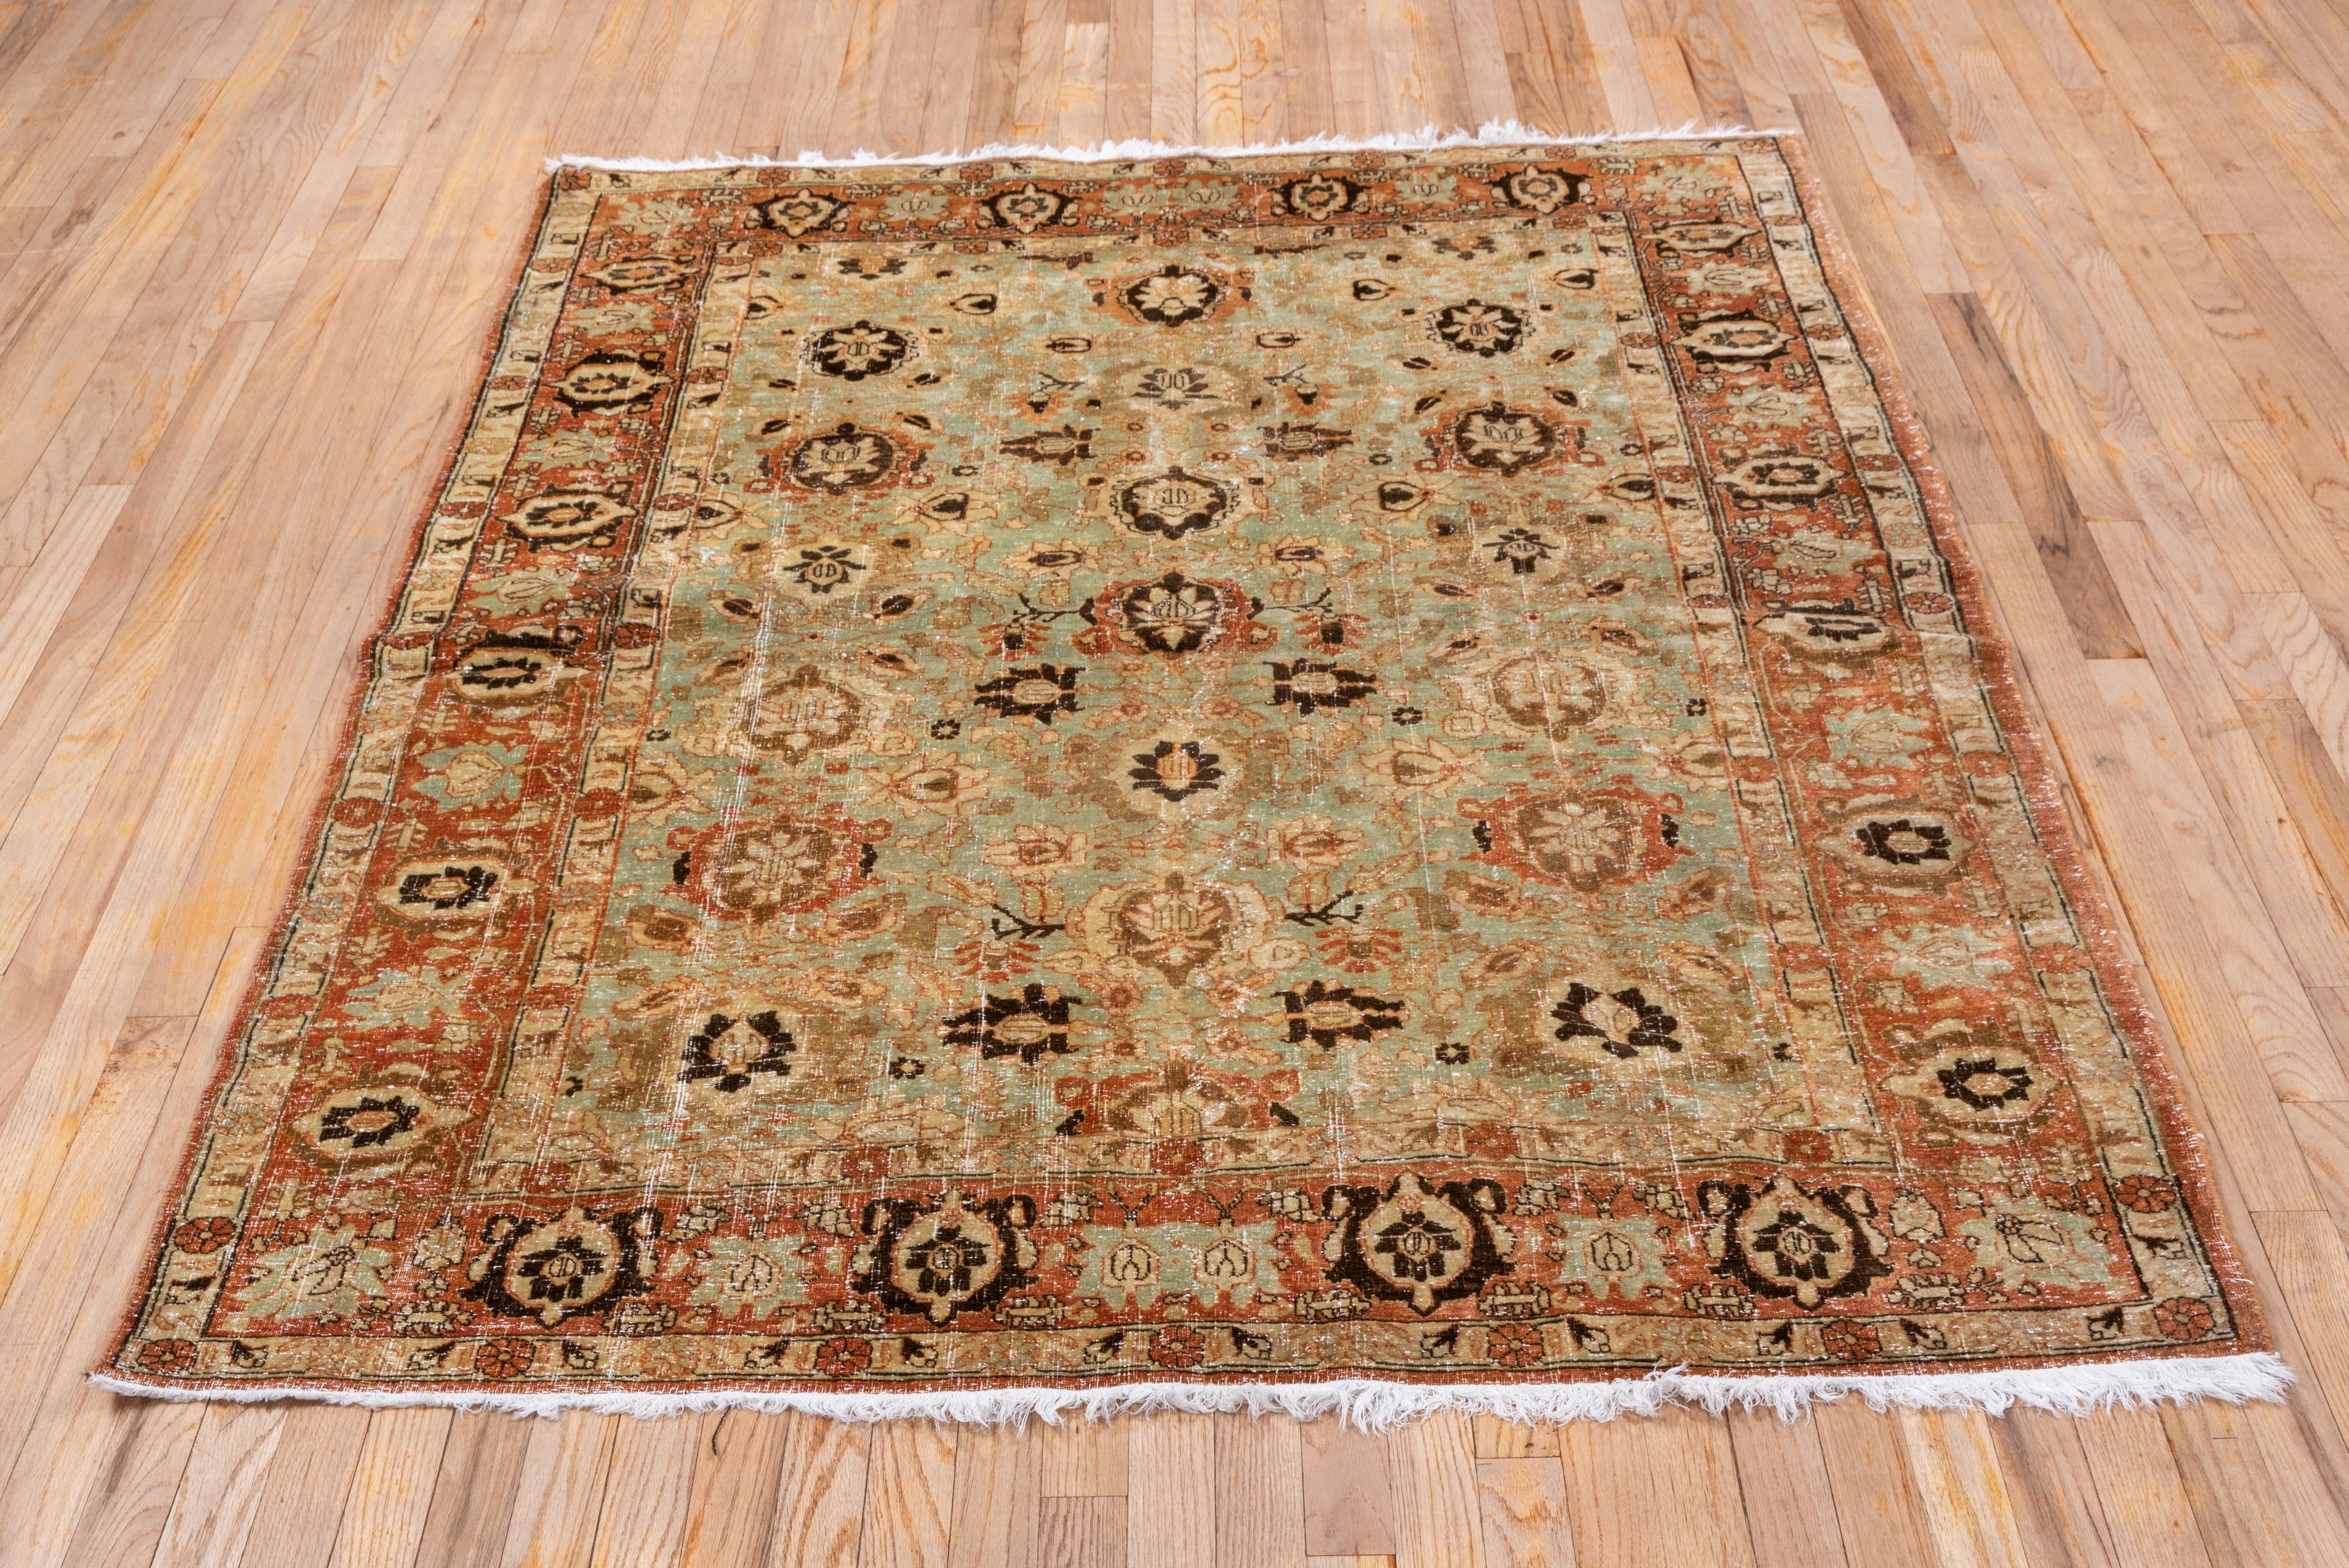 In the Persian Tabriz style with a three column palmette pattern accented in shades of rust, on seafoam field. Two types of palmettes decorate the abrashed rust main border. Medium weave on cotton. Fair condition with general wear exposing white